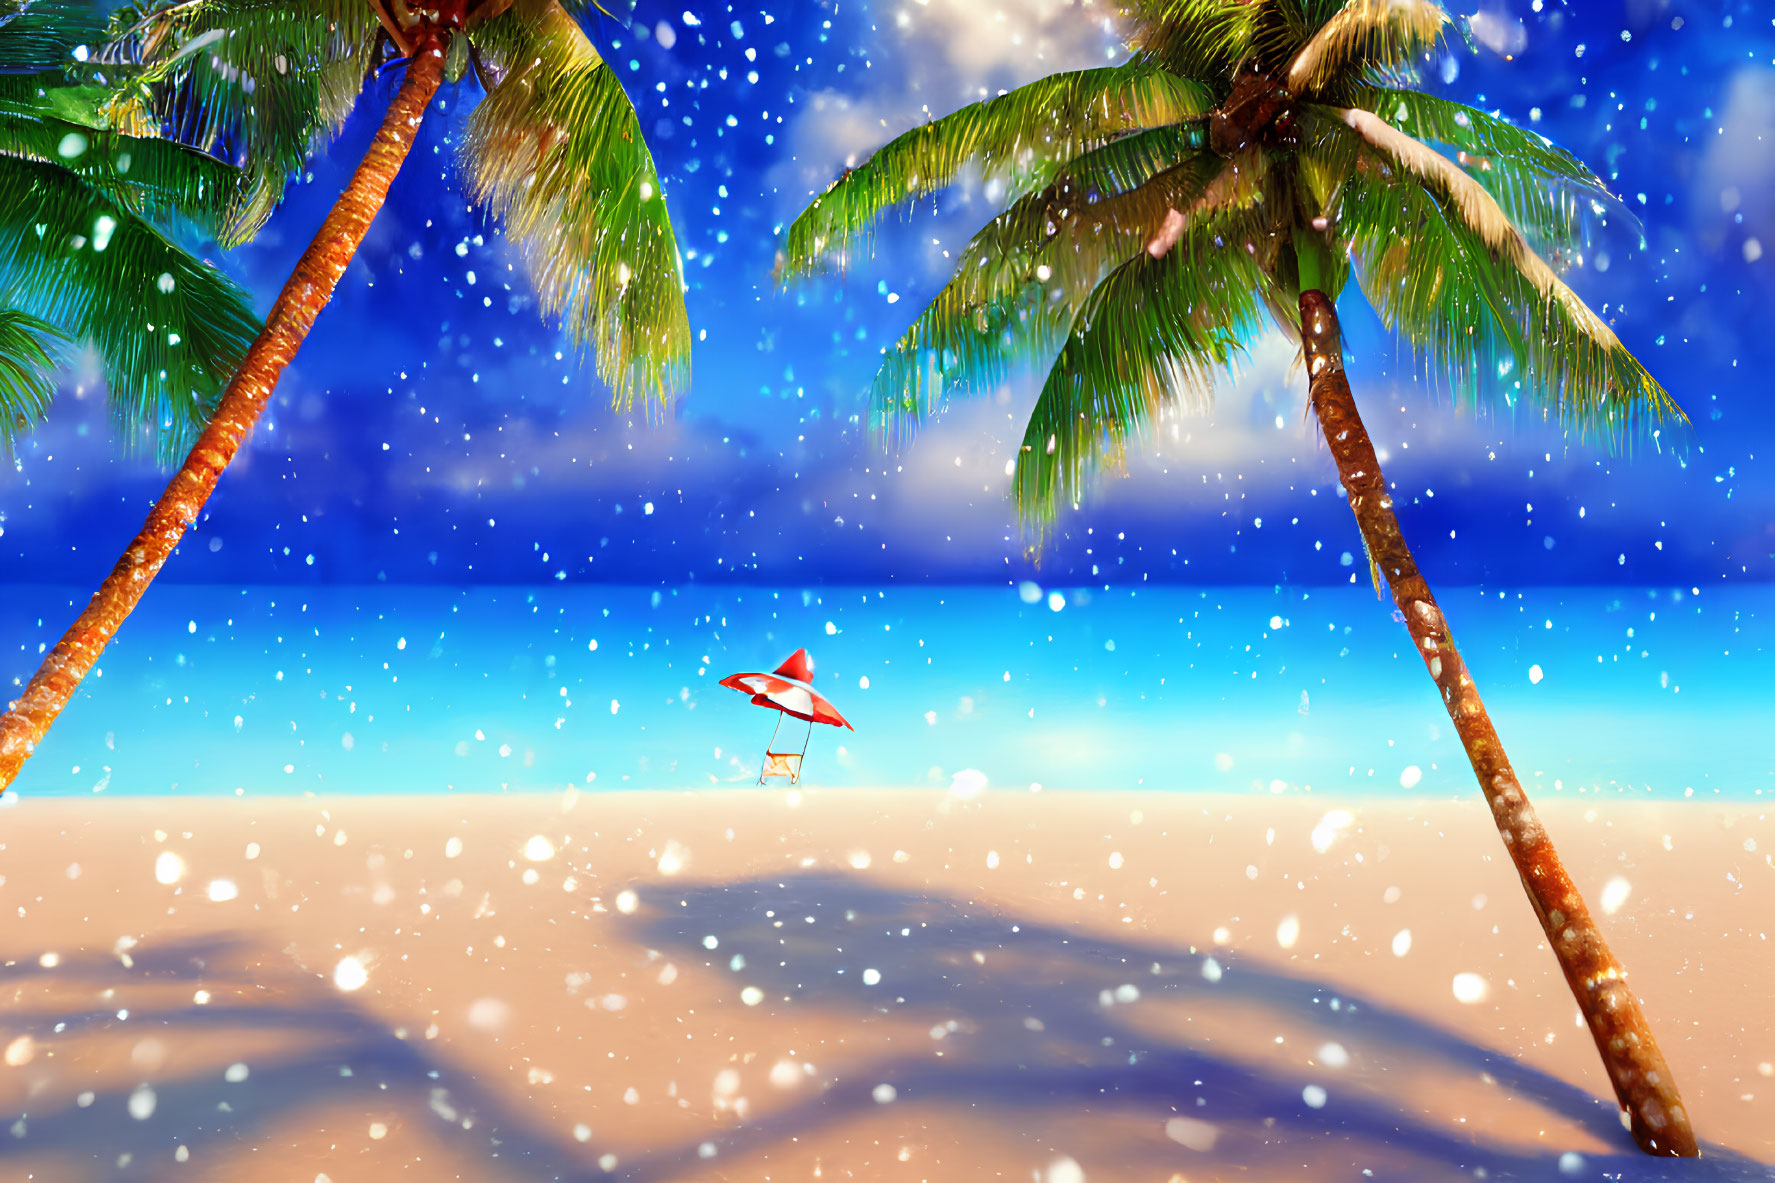 Tropical beach scene with palm trees, sun lounger, starry sky, and snowflakes